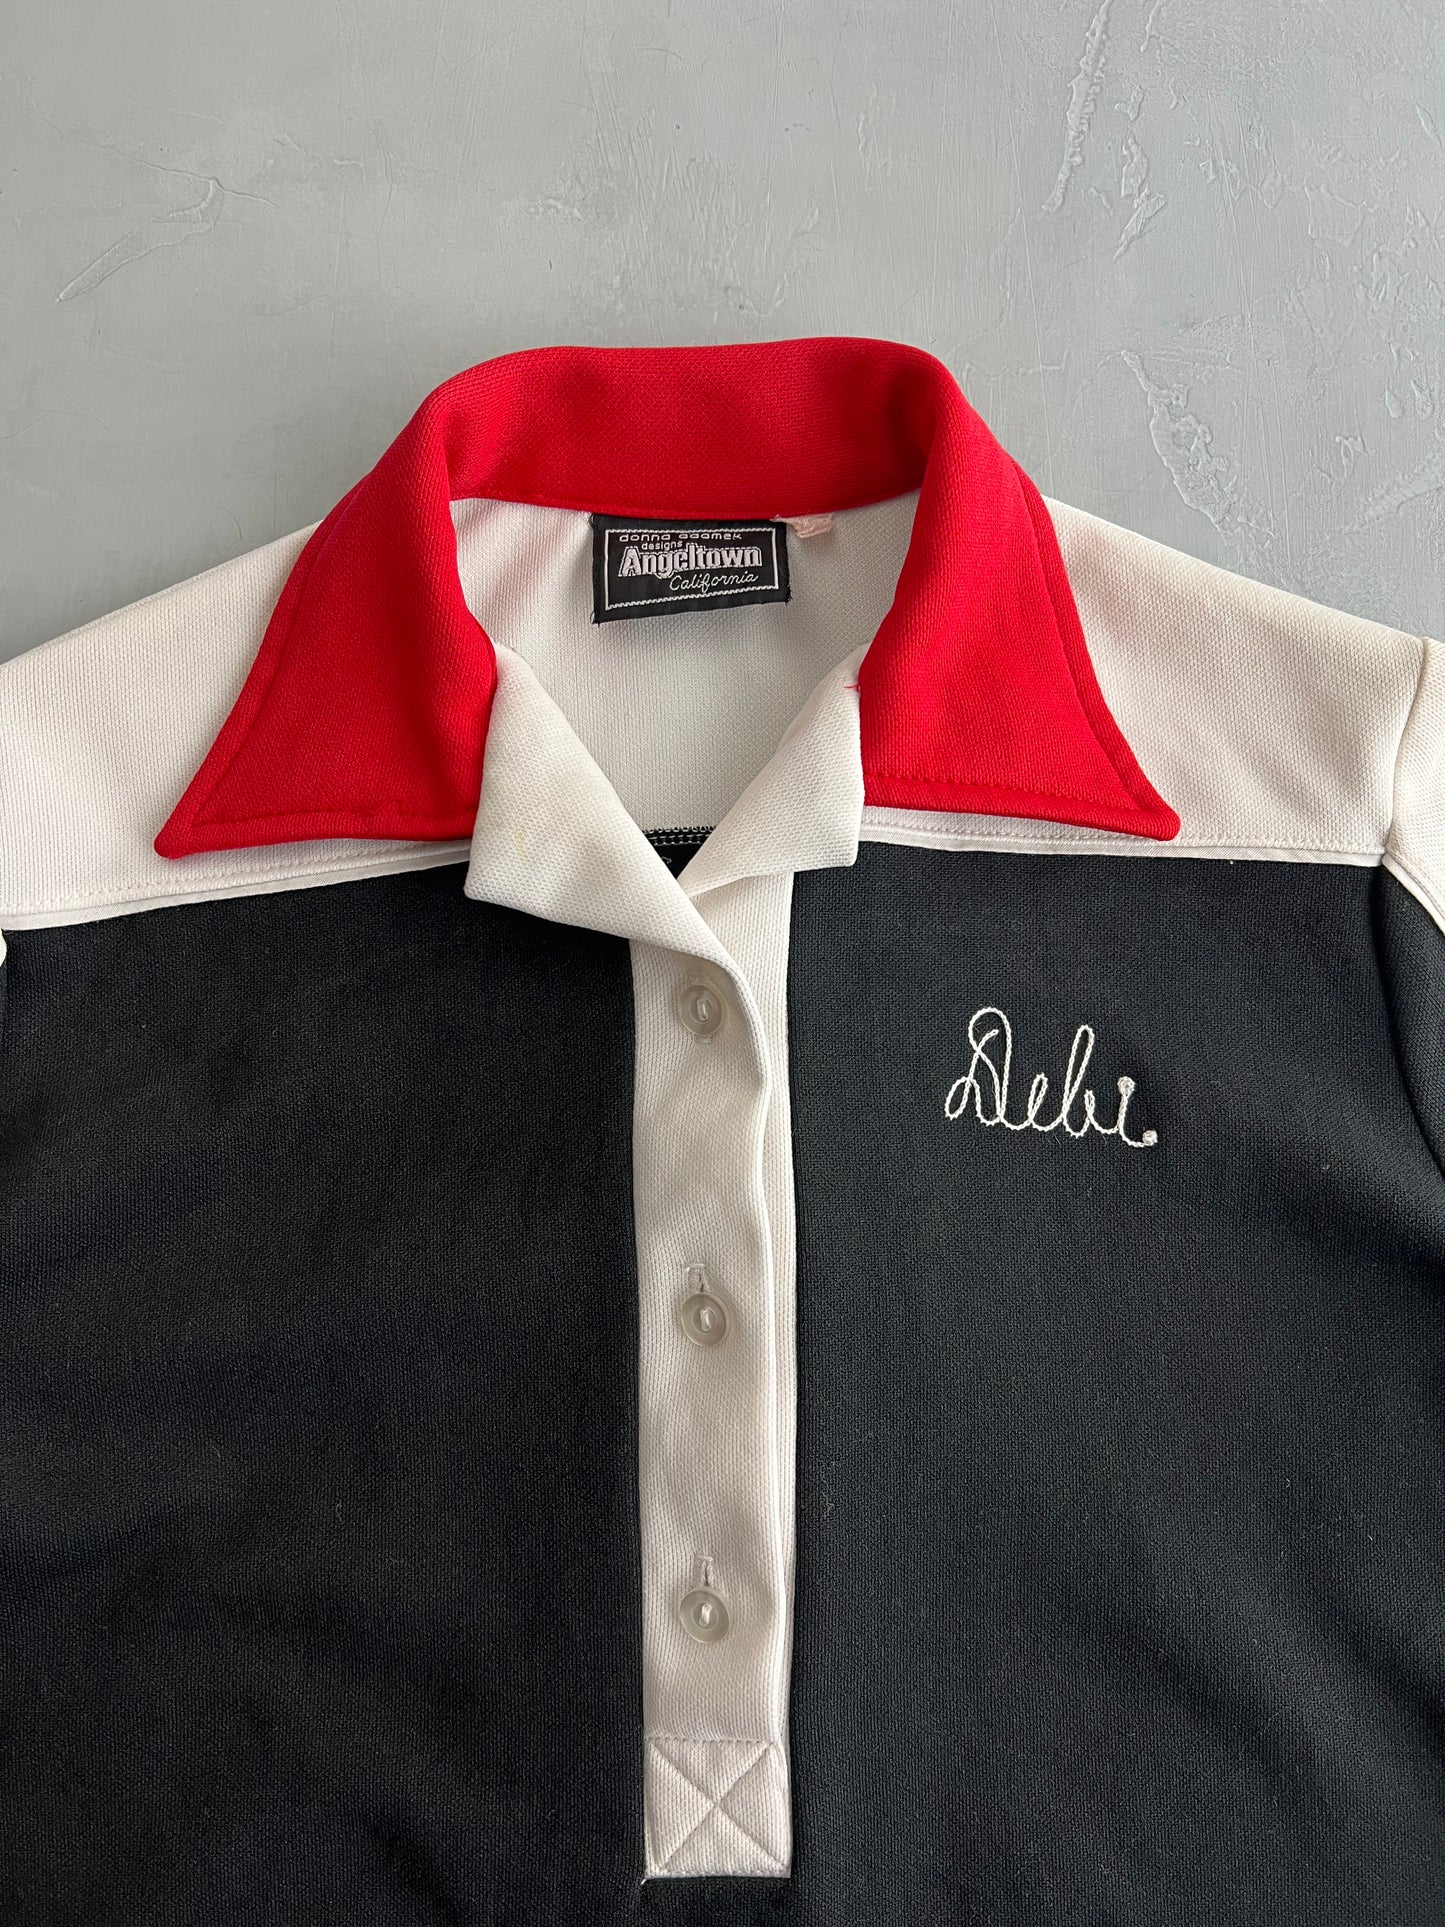 70's State Farms Bowling Shirt [S]